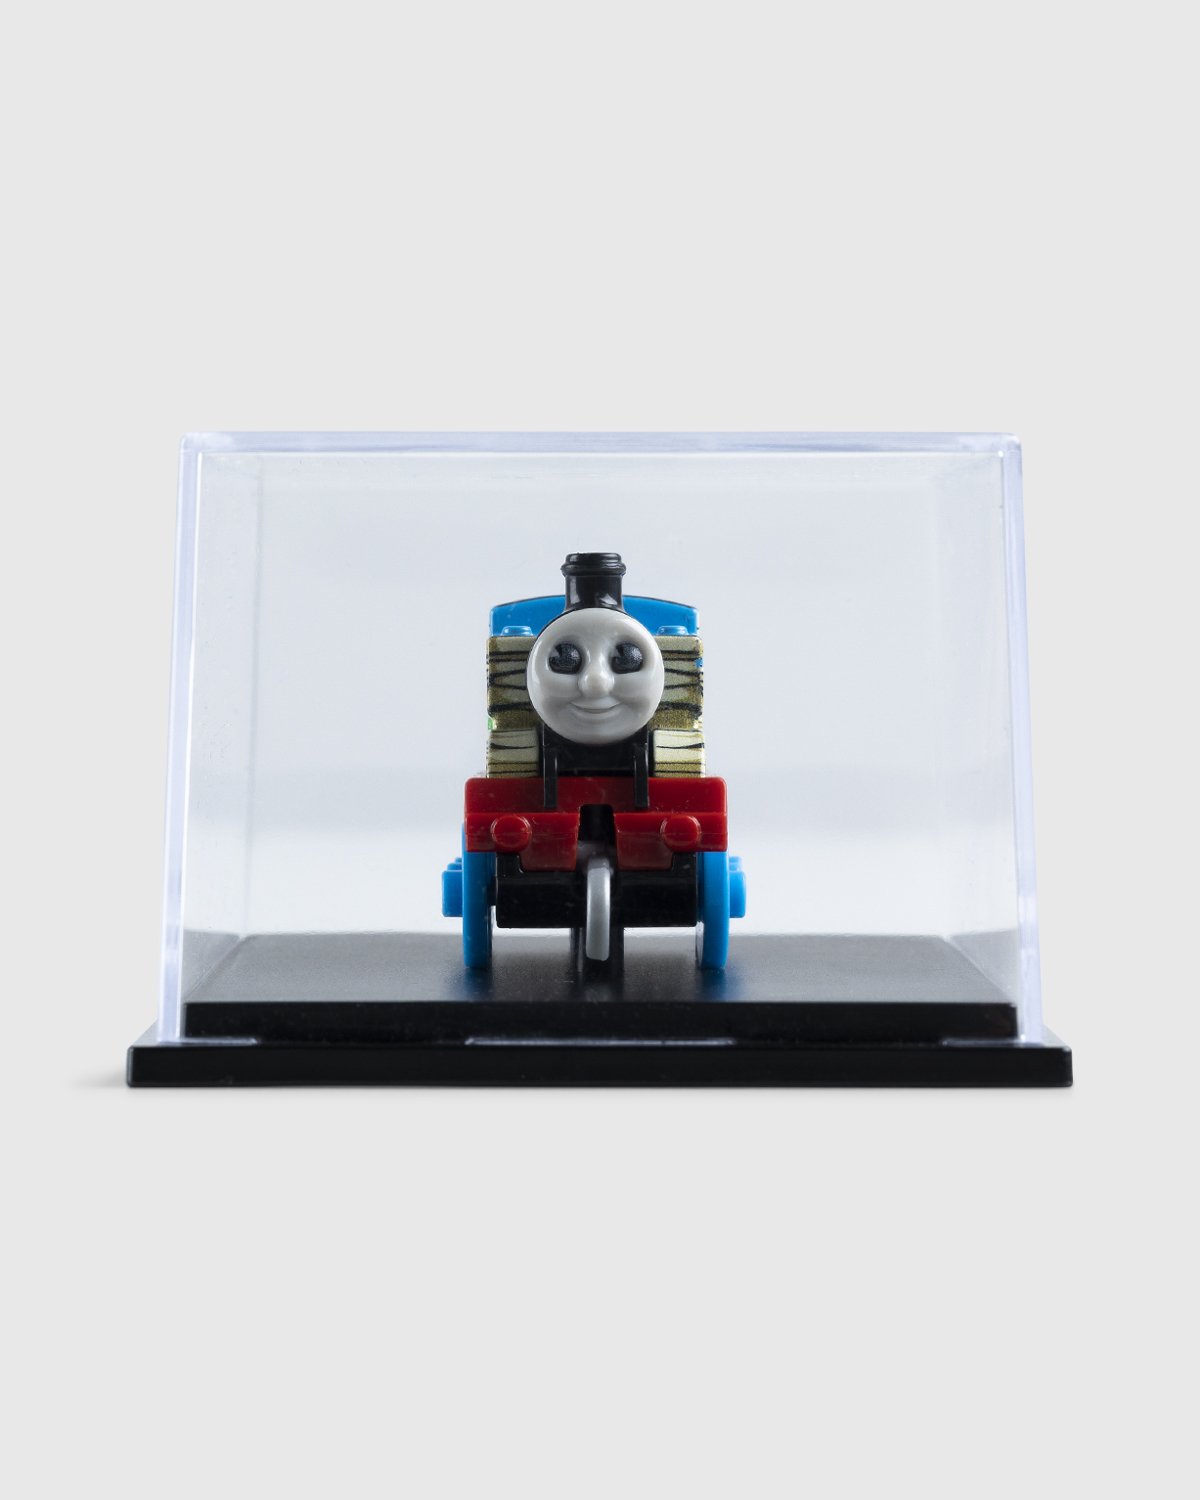 Mattel Creations x Blue the Great - Thomas the Tank Engine Diecast - Lifestyle - Blue - Image 3